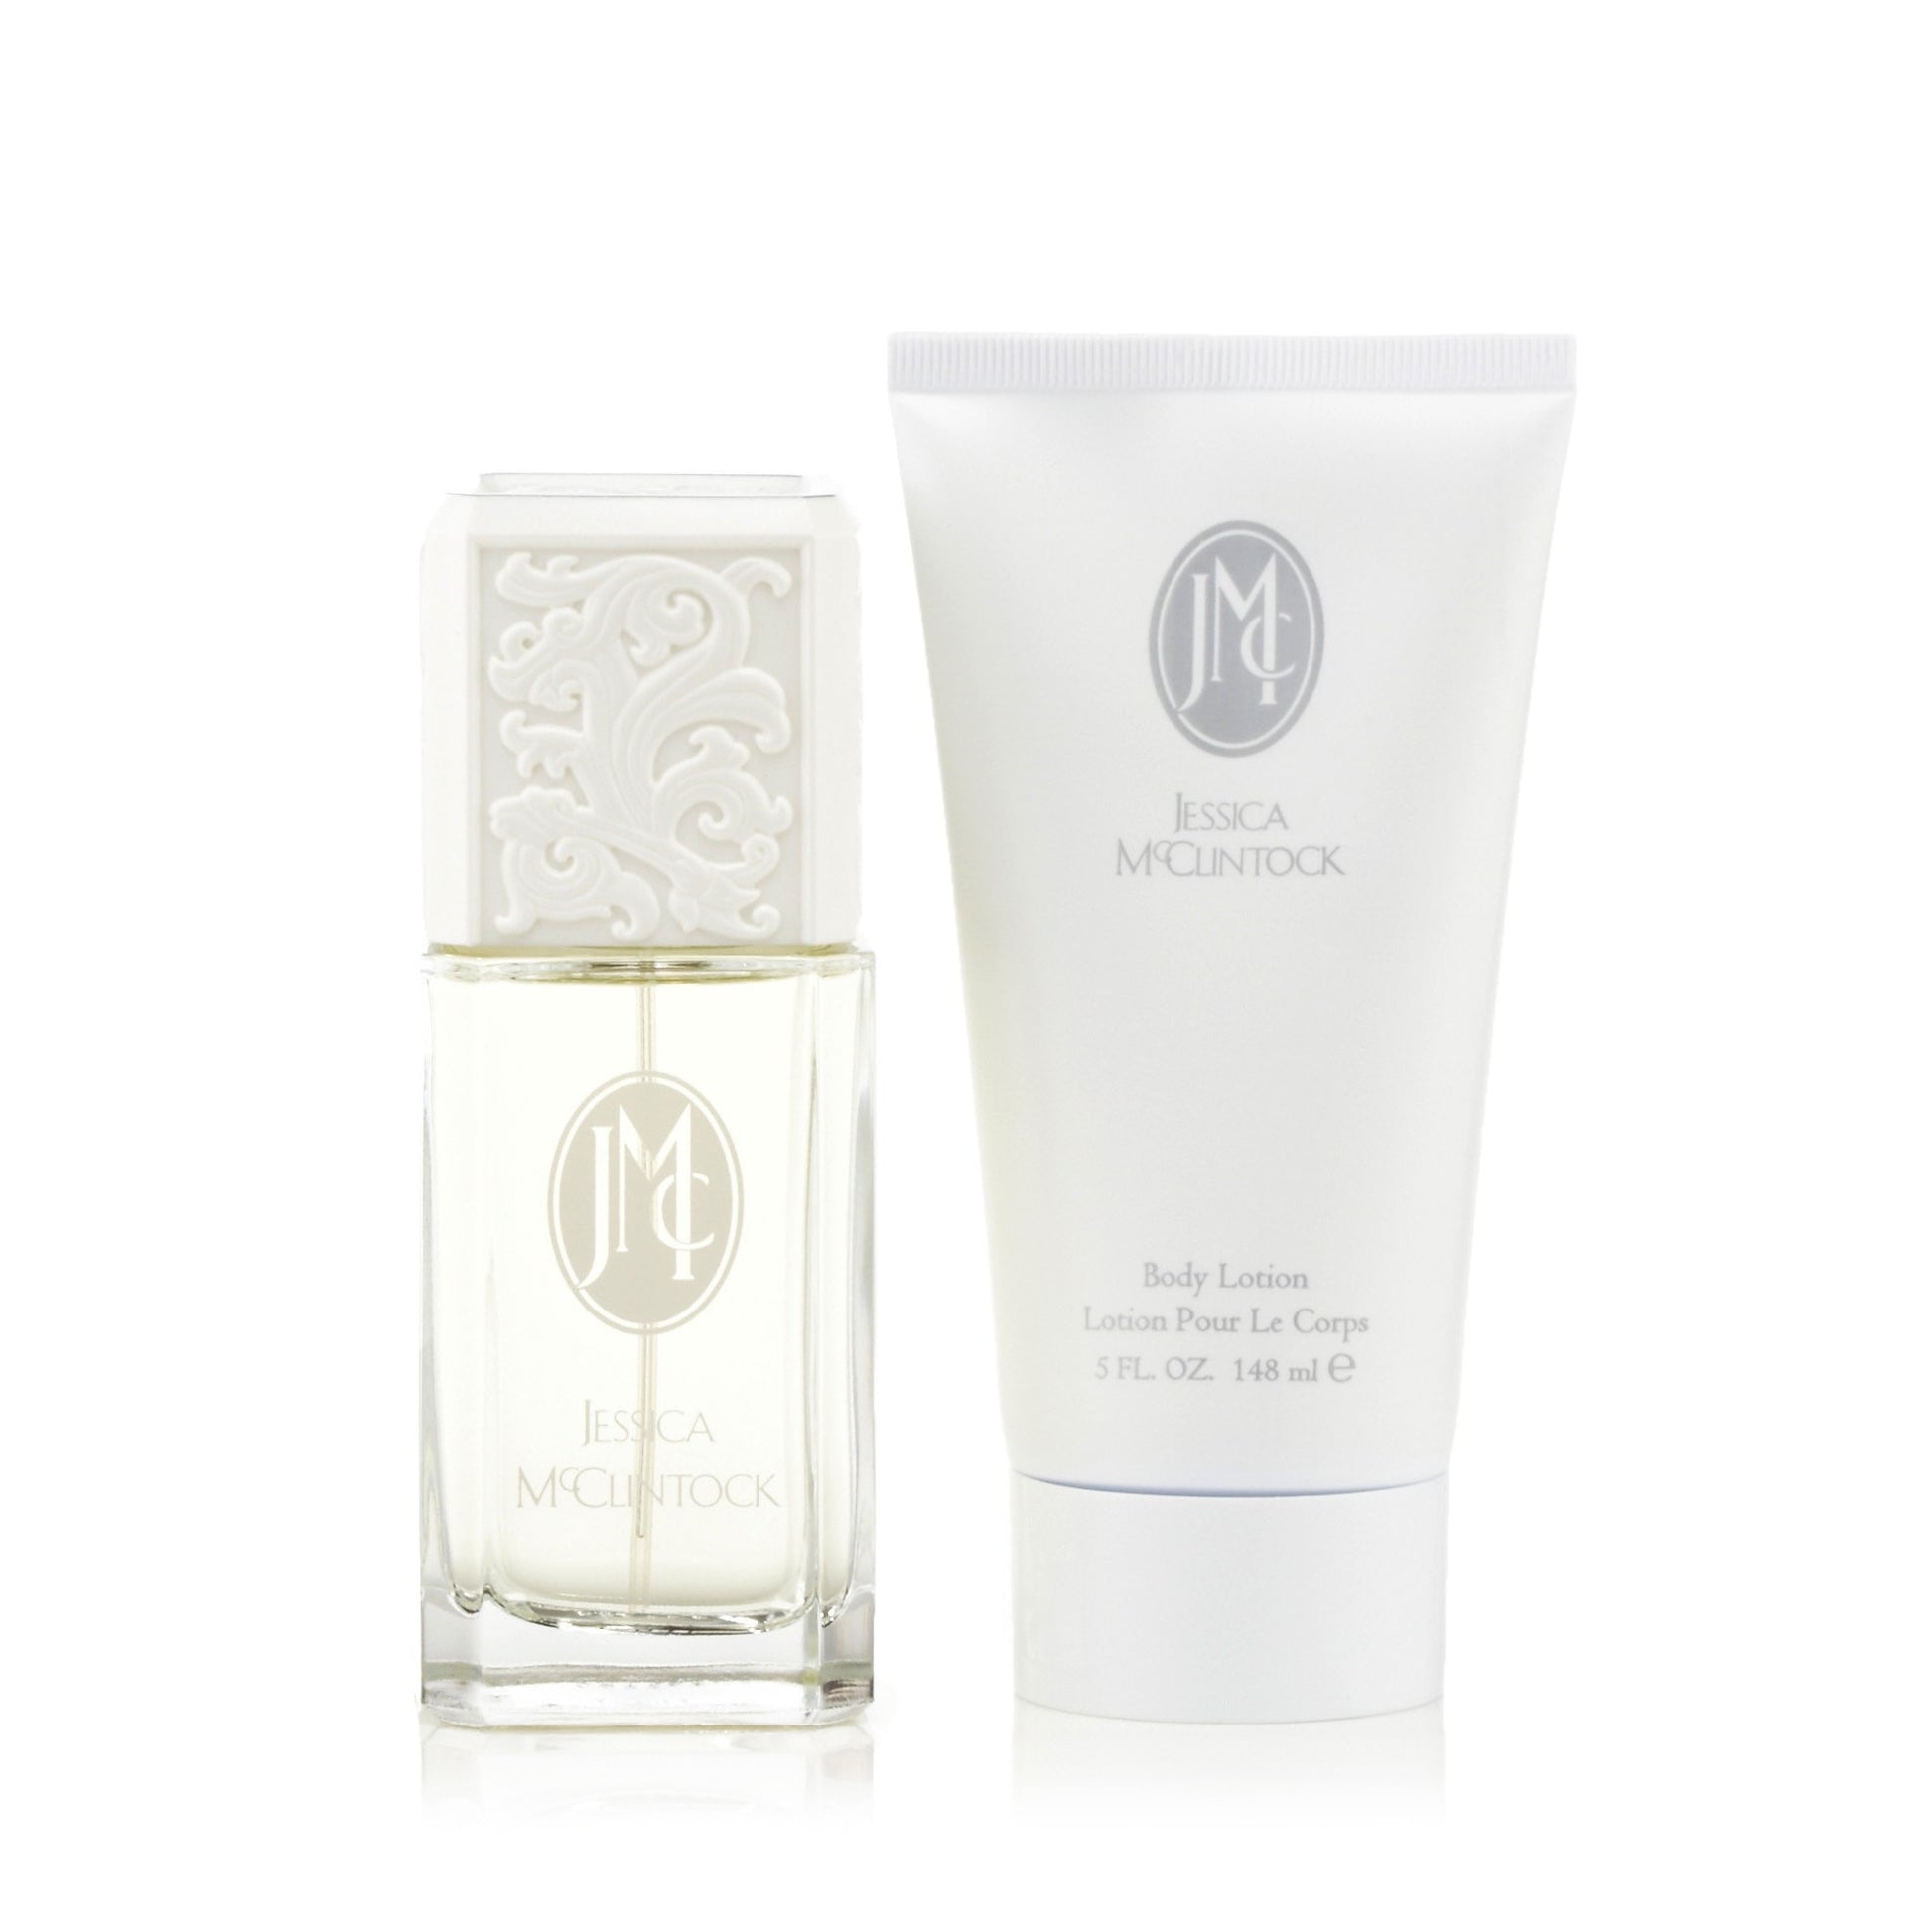 Jessica Mcclintock Gift Set for Women by Jessica McClintock 4.0 oz. Click to open in modal